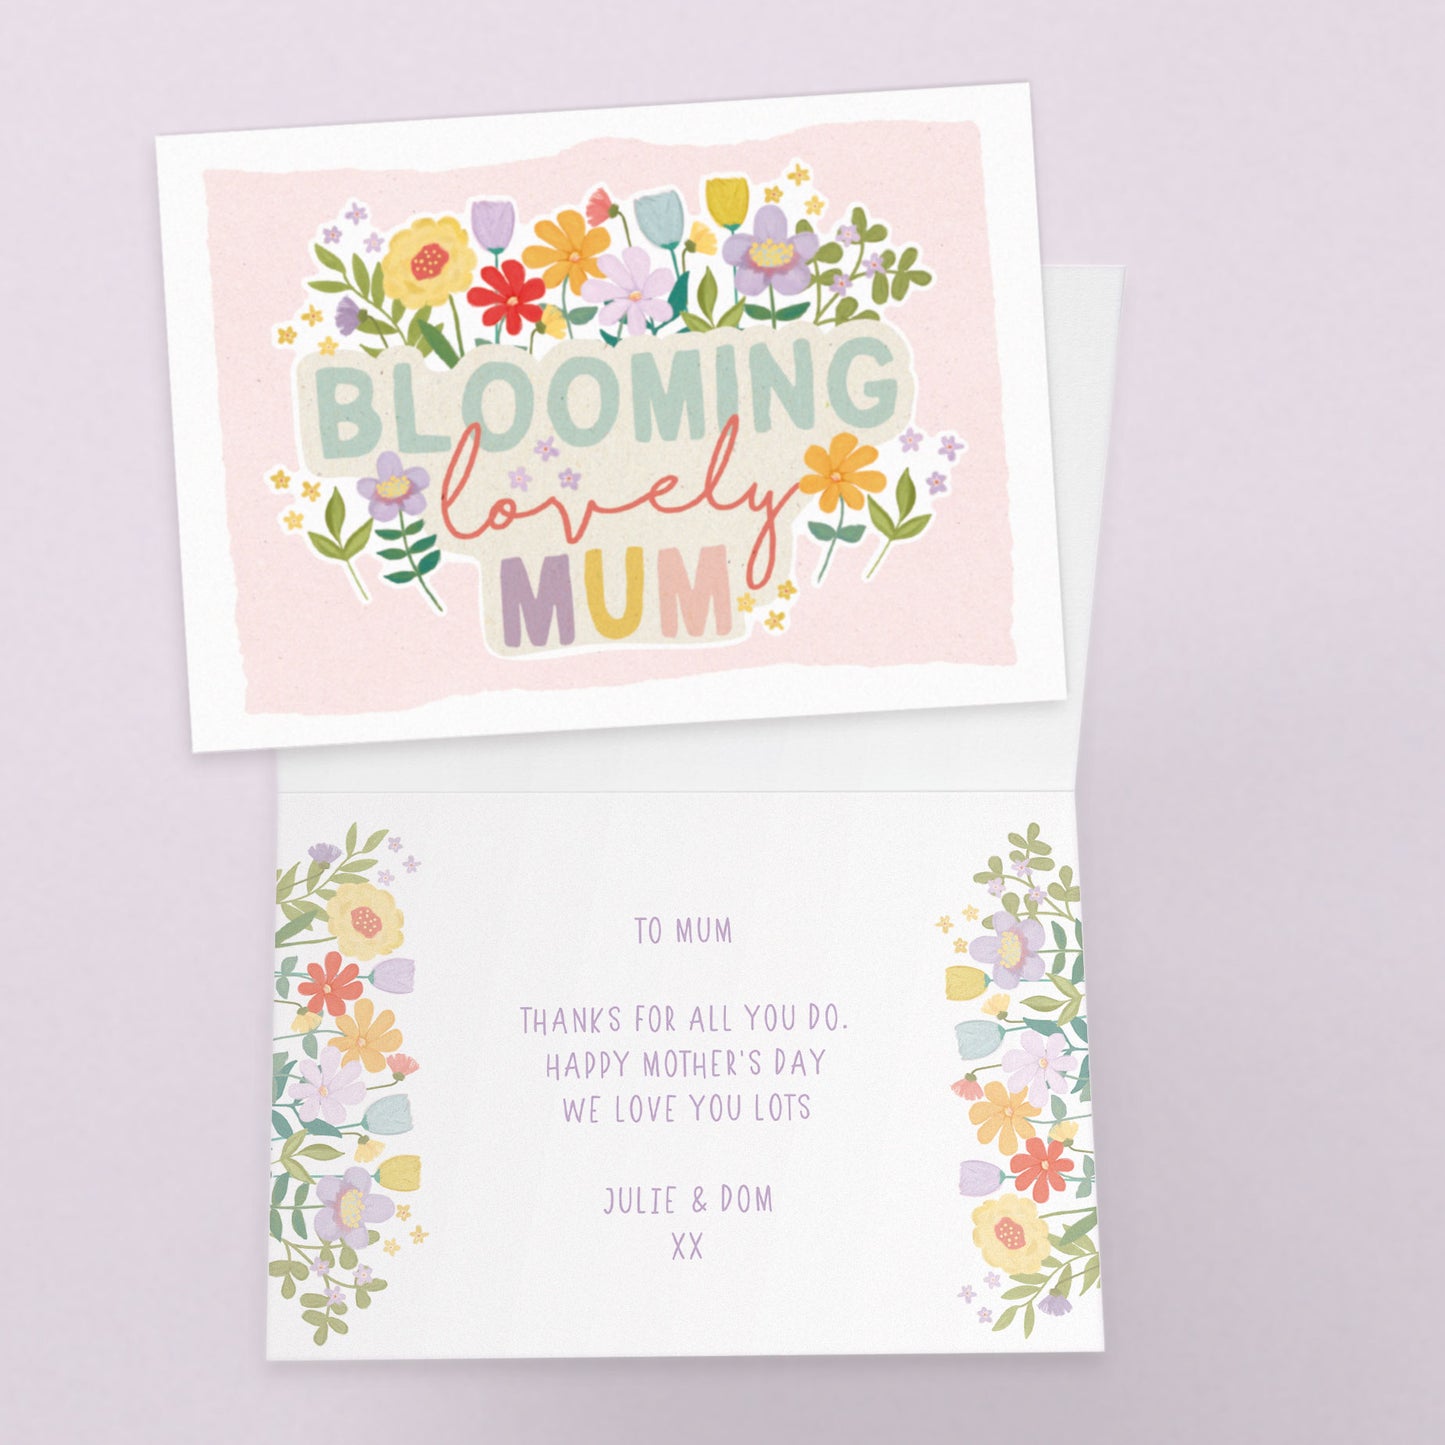 Blooming Lovely Mum Card. Floral Card. Personalised Mother's Day Card. Mum, Mummy, Grandma Card. Send Direct Option available.